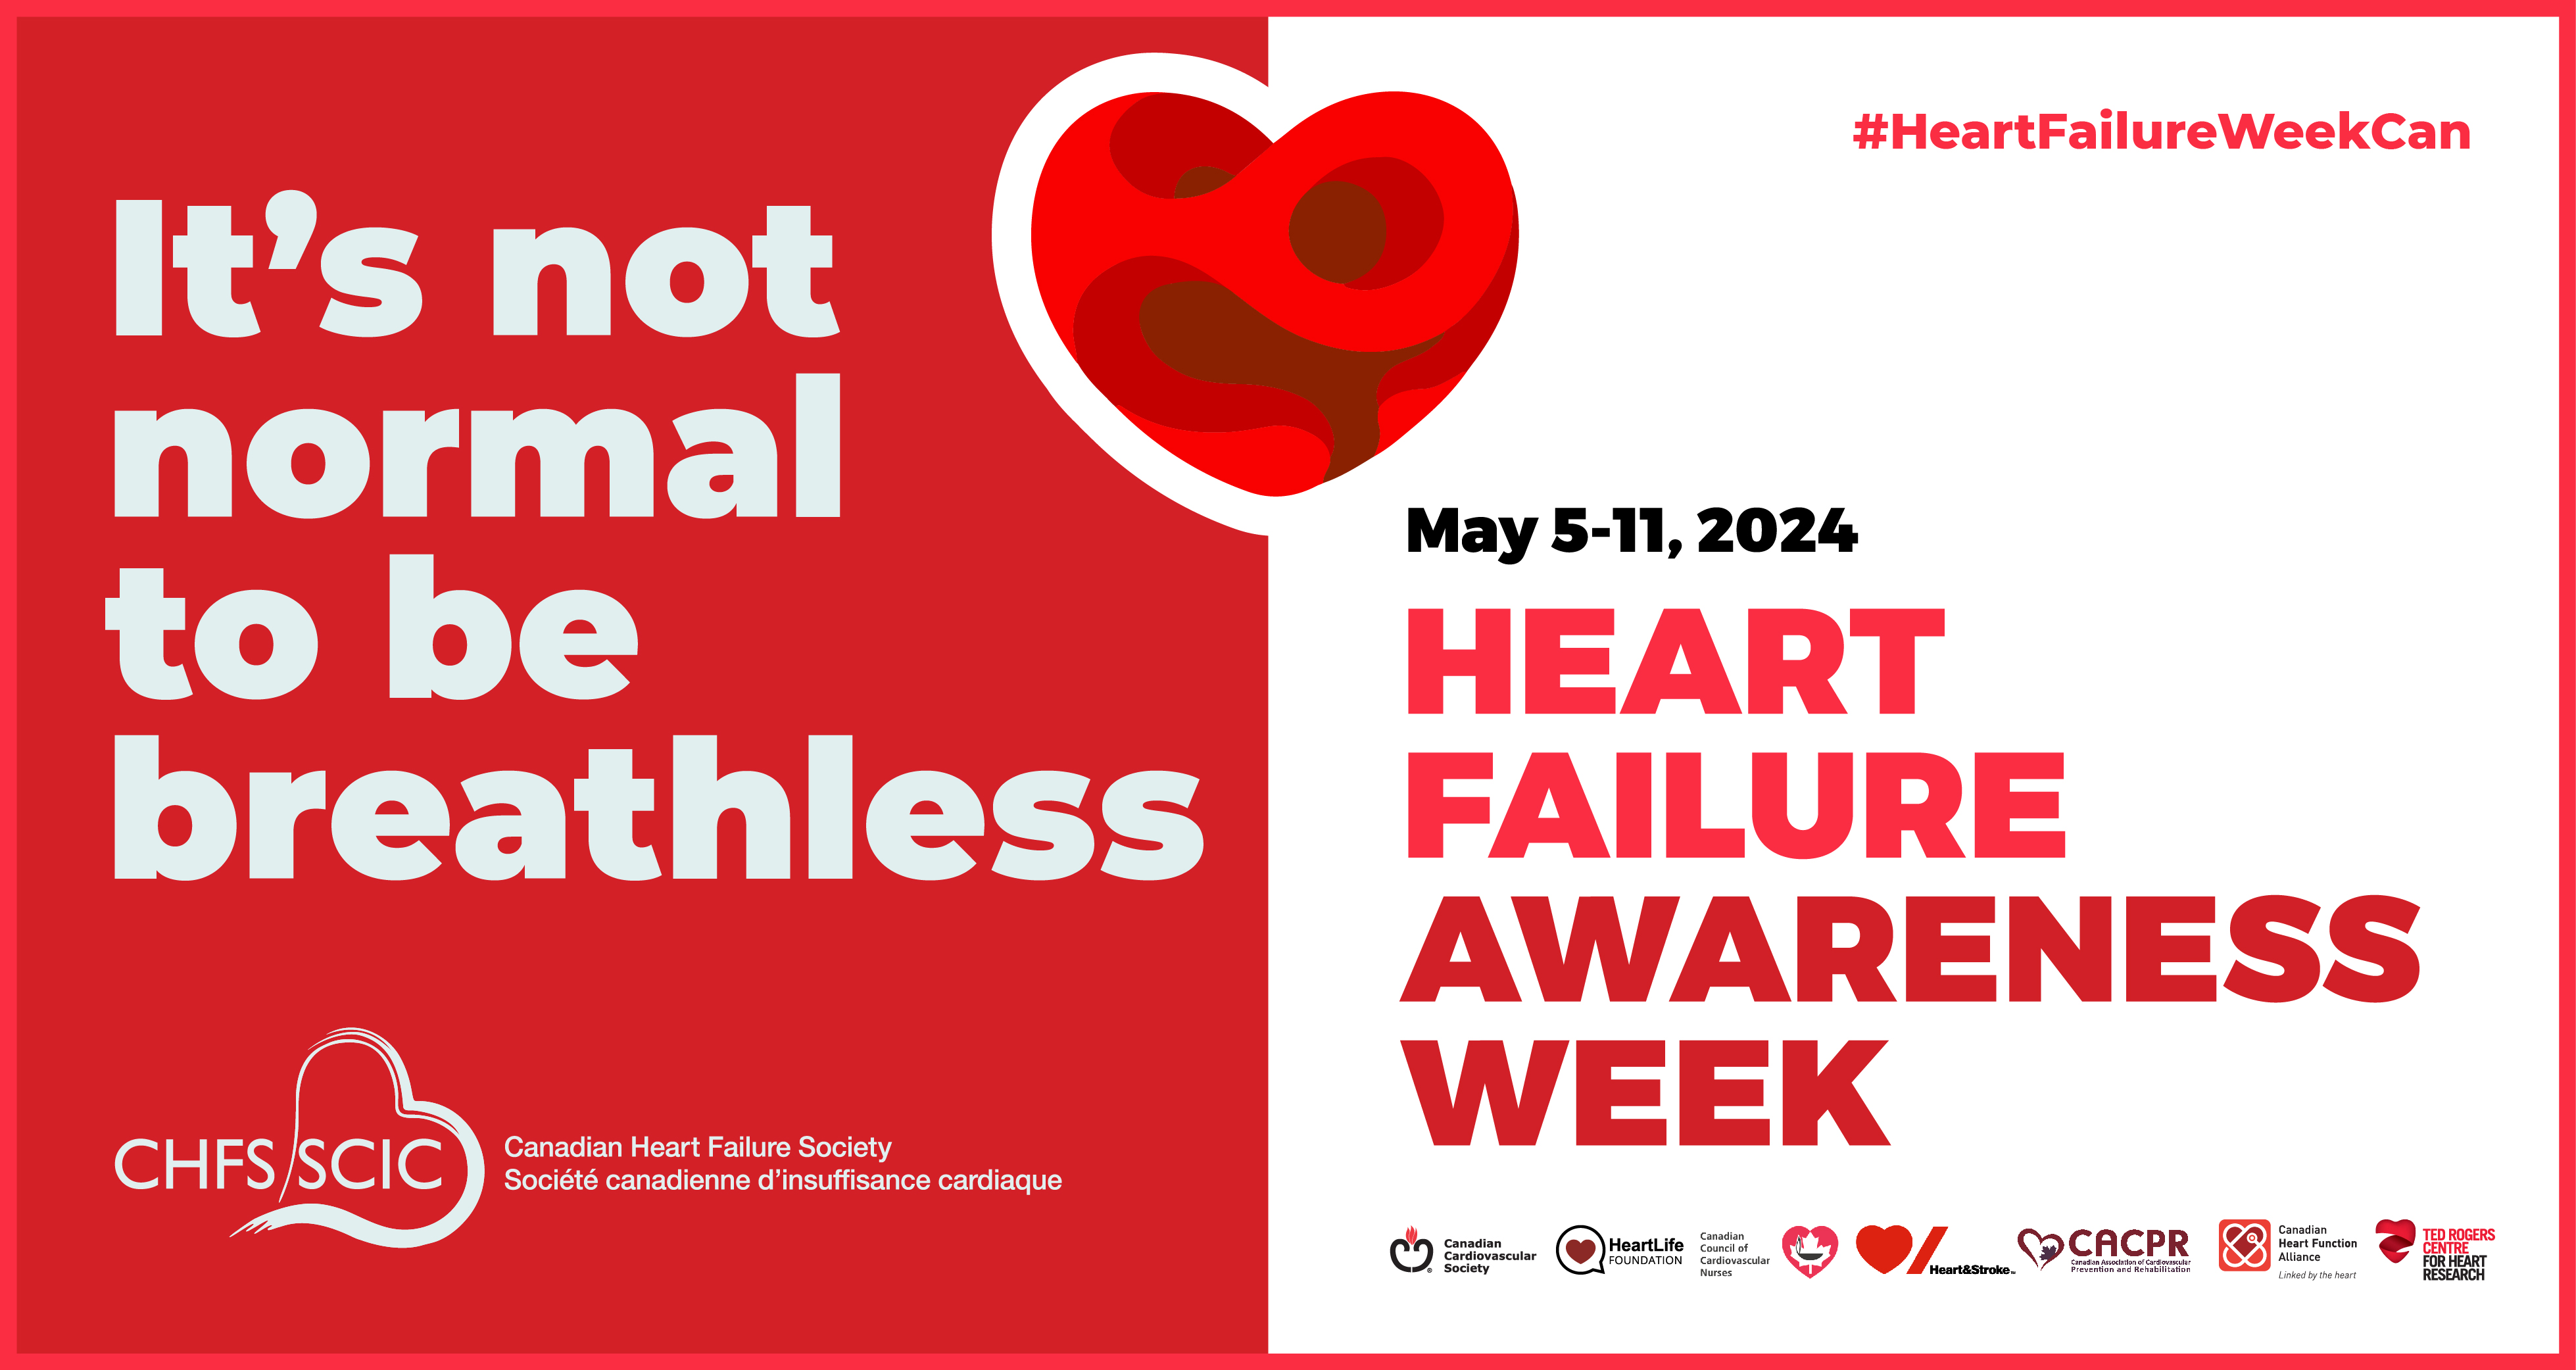 Poster for the Heart Failure Awareness Week, which will take place from May 5th to 11, 2024.